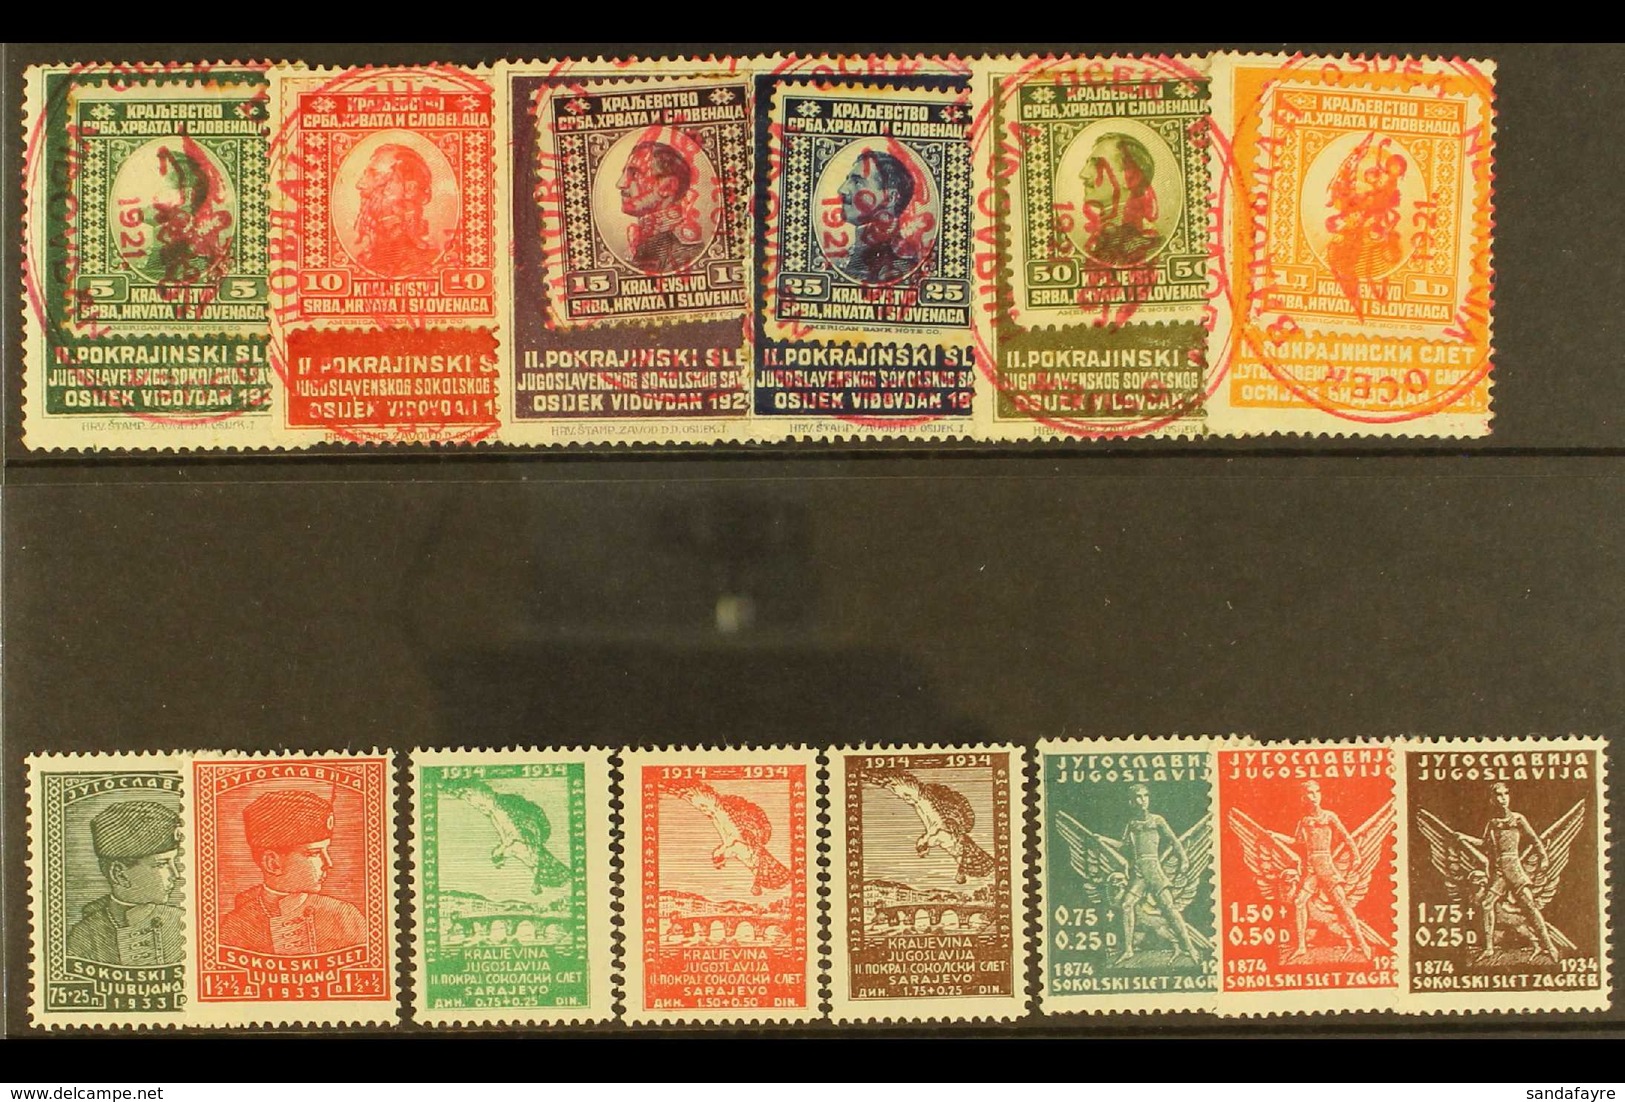 GYMNASTICS - THE SOKOL MOVEMENT  1921-34 Group Includes 1921 Set Of 6 Stamps Affixed To Special Sokol Games "collar" Lab - Unclassified